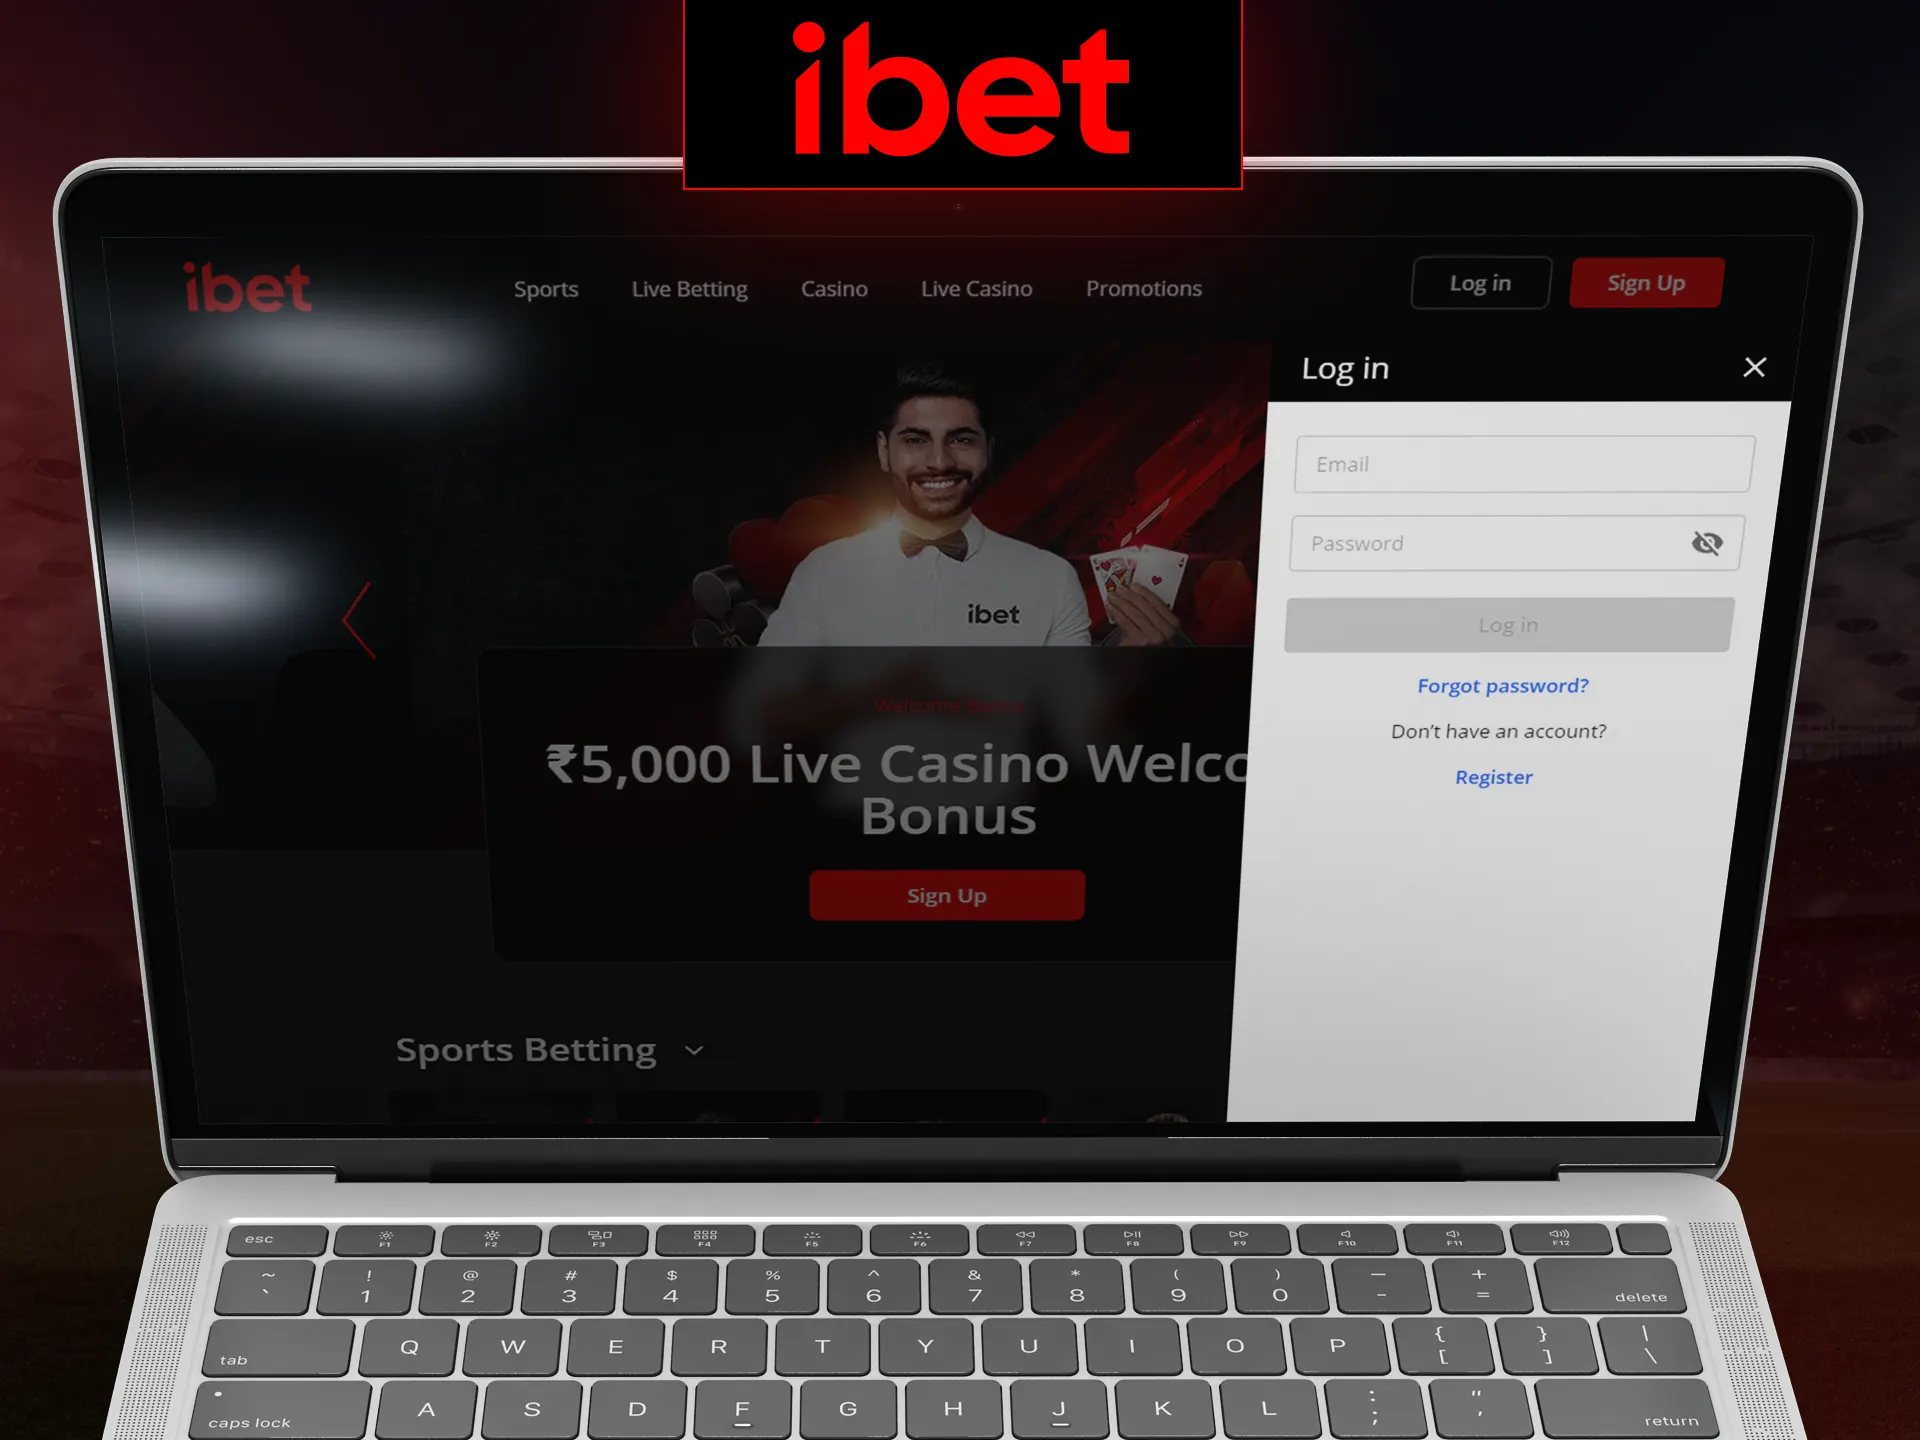 You can log in to your iBet account either from a personal computer or from a mobile device.